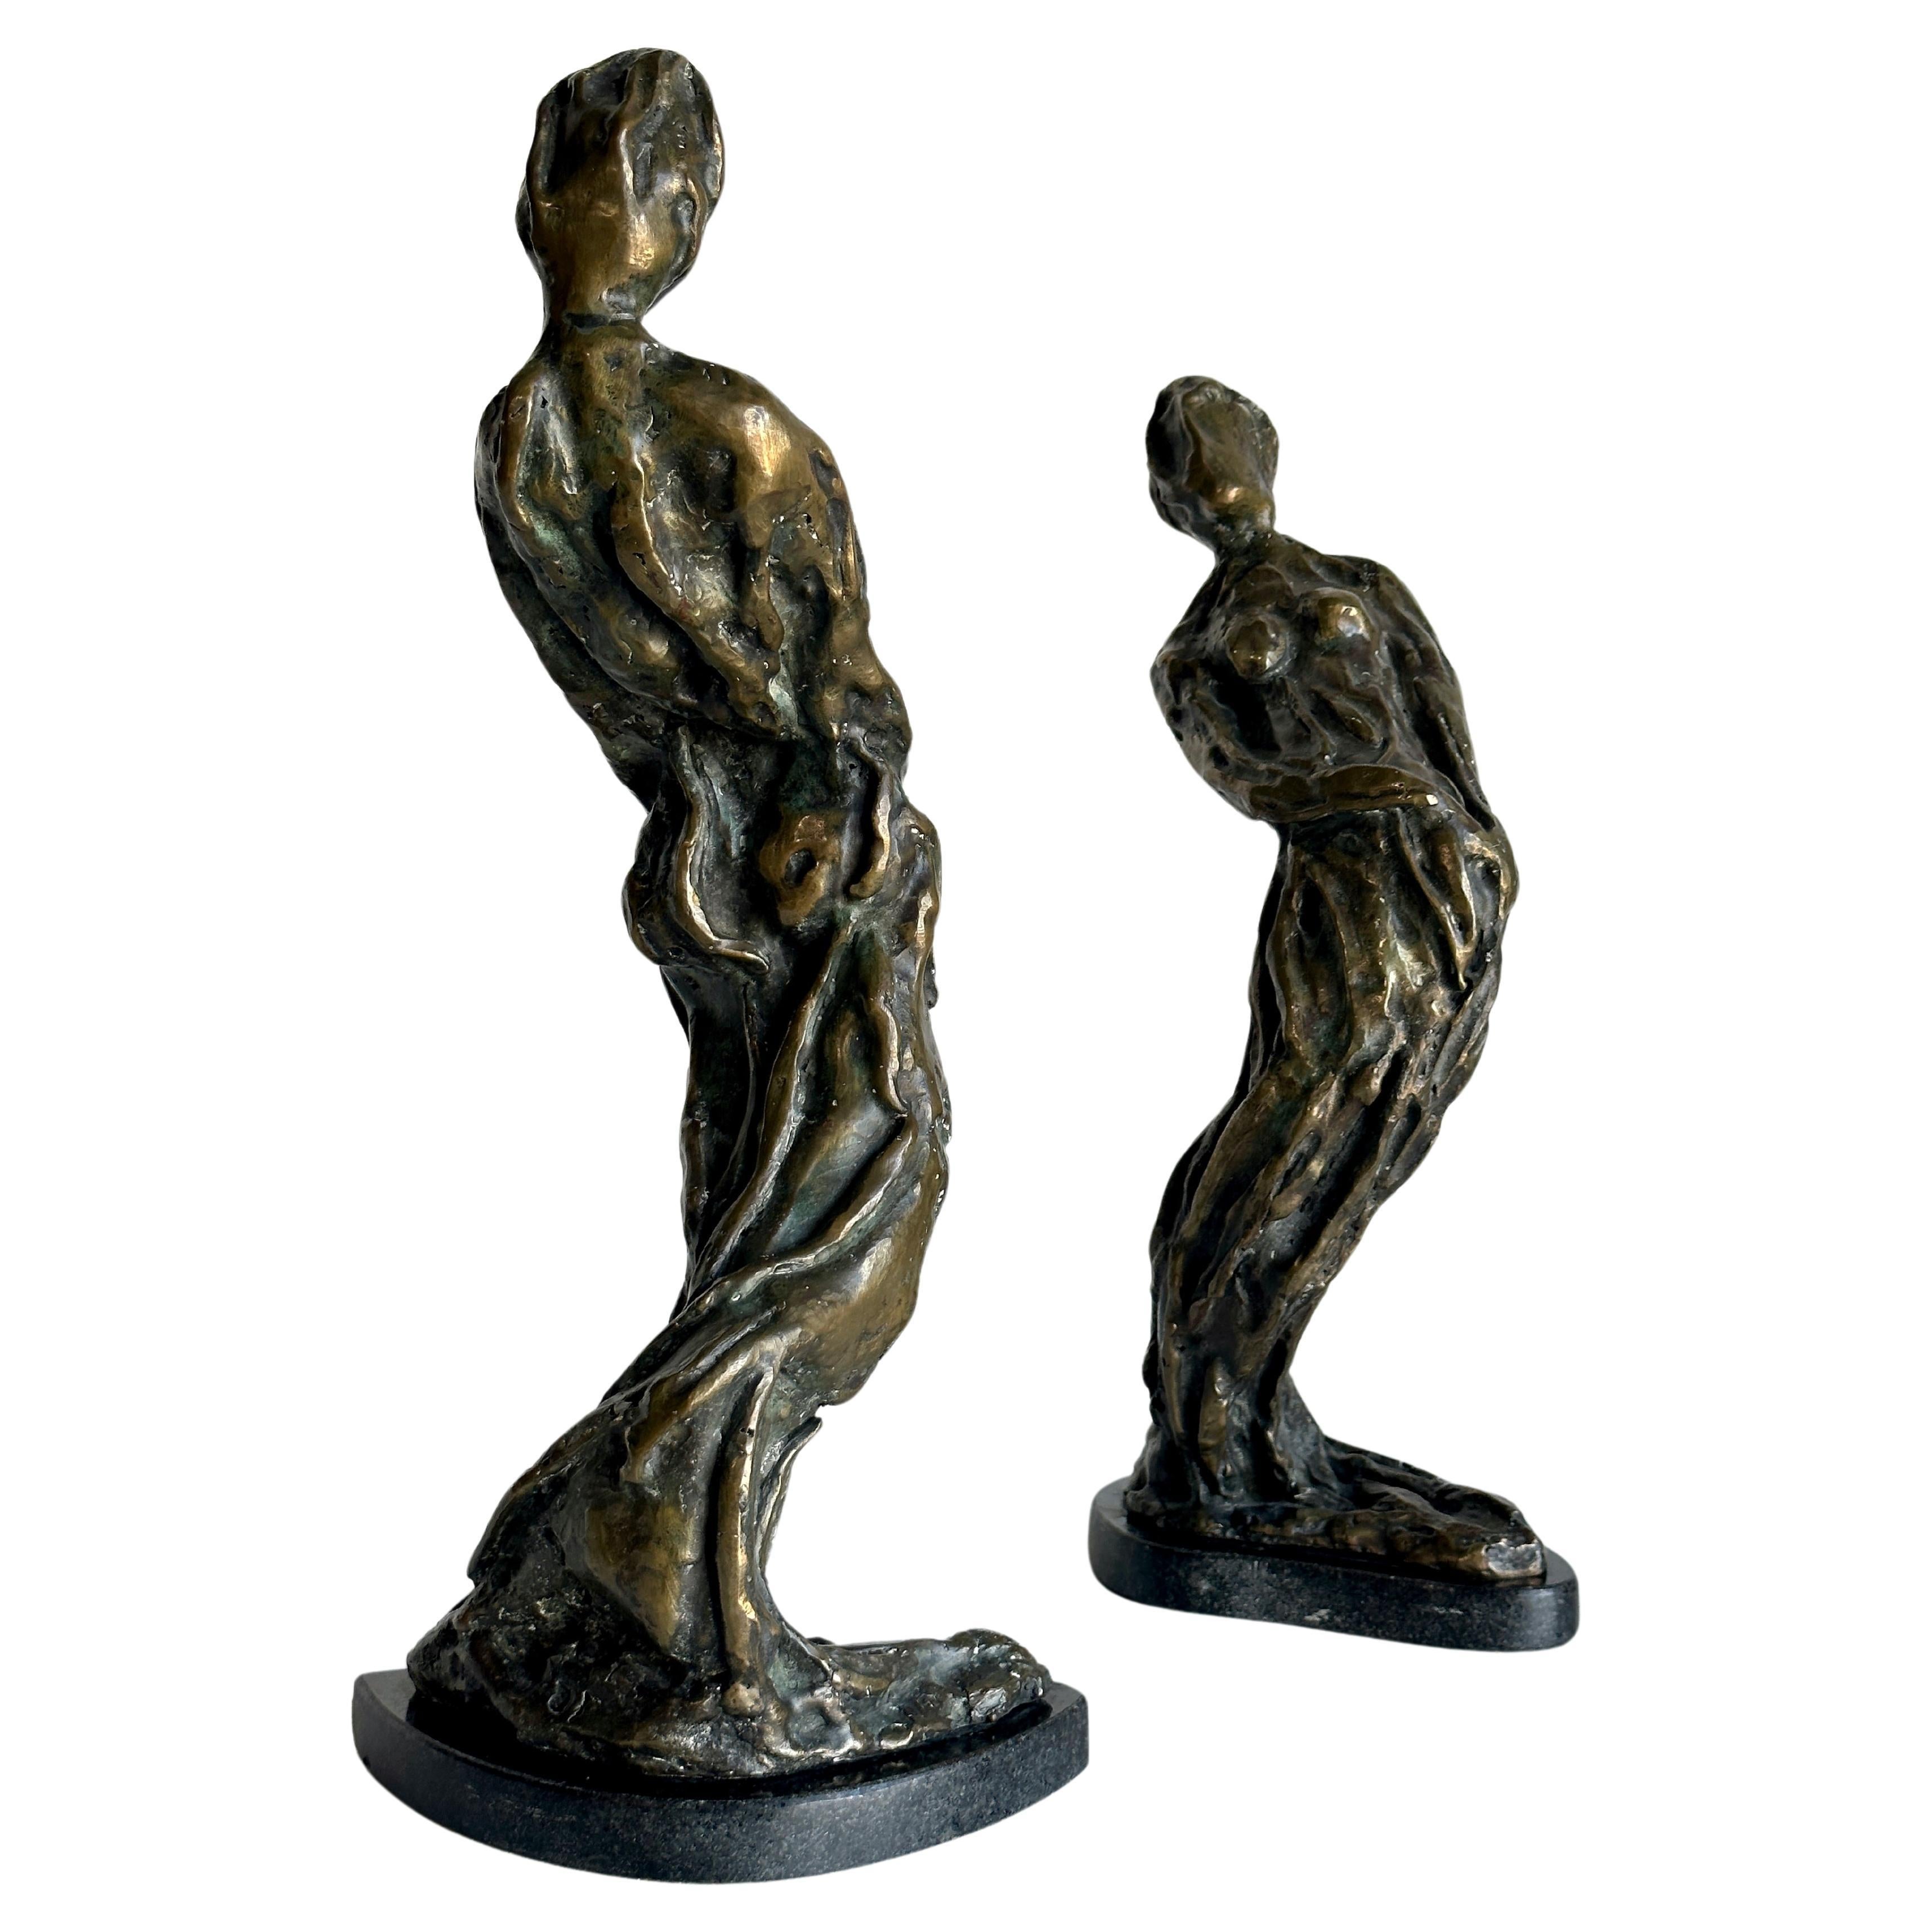 Modernist figurative abstract bronze sculptures, sold as a pair. Both signed by the artist- appears to read “Marks”.  Highly textured and manipulated surface, really nicely cast, likely in a lost wax casting process. Good size- the largest being